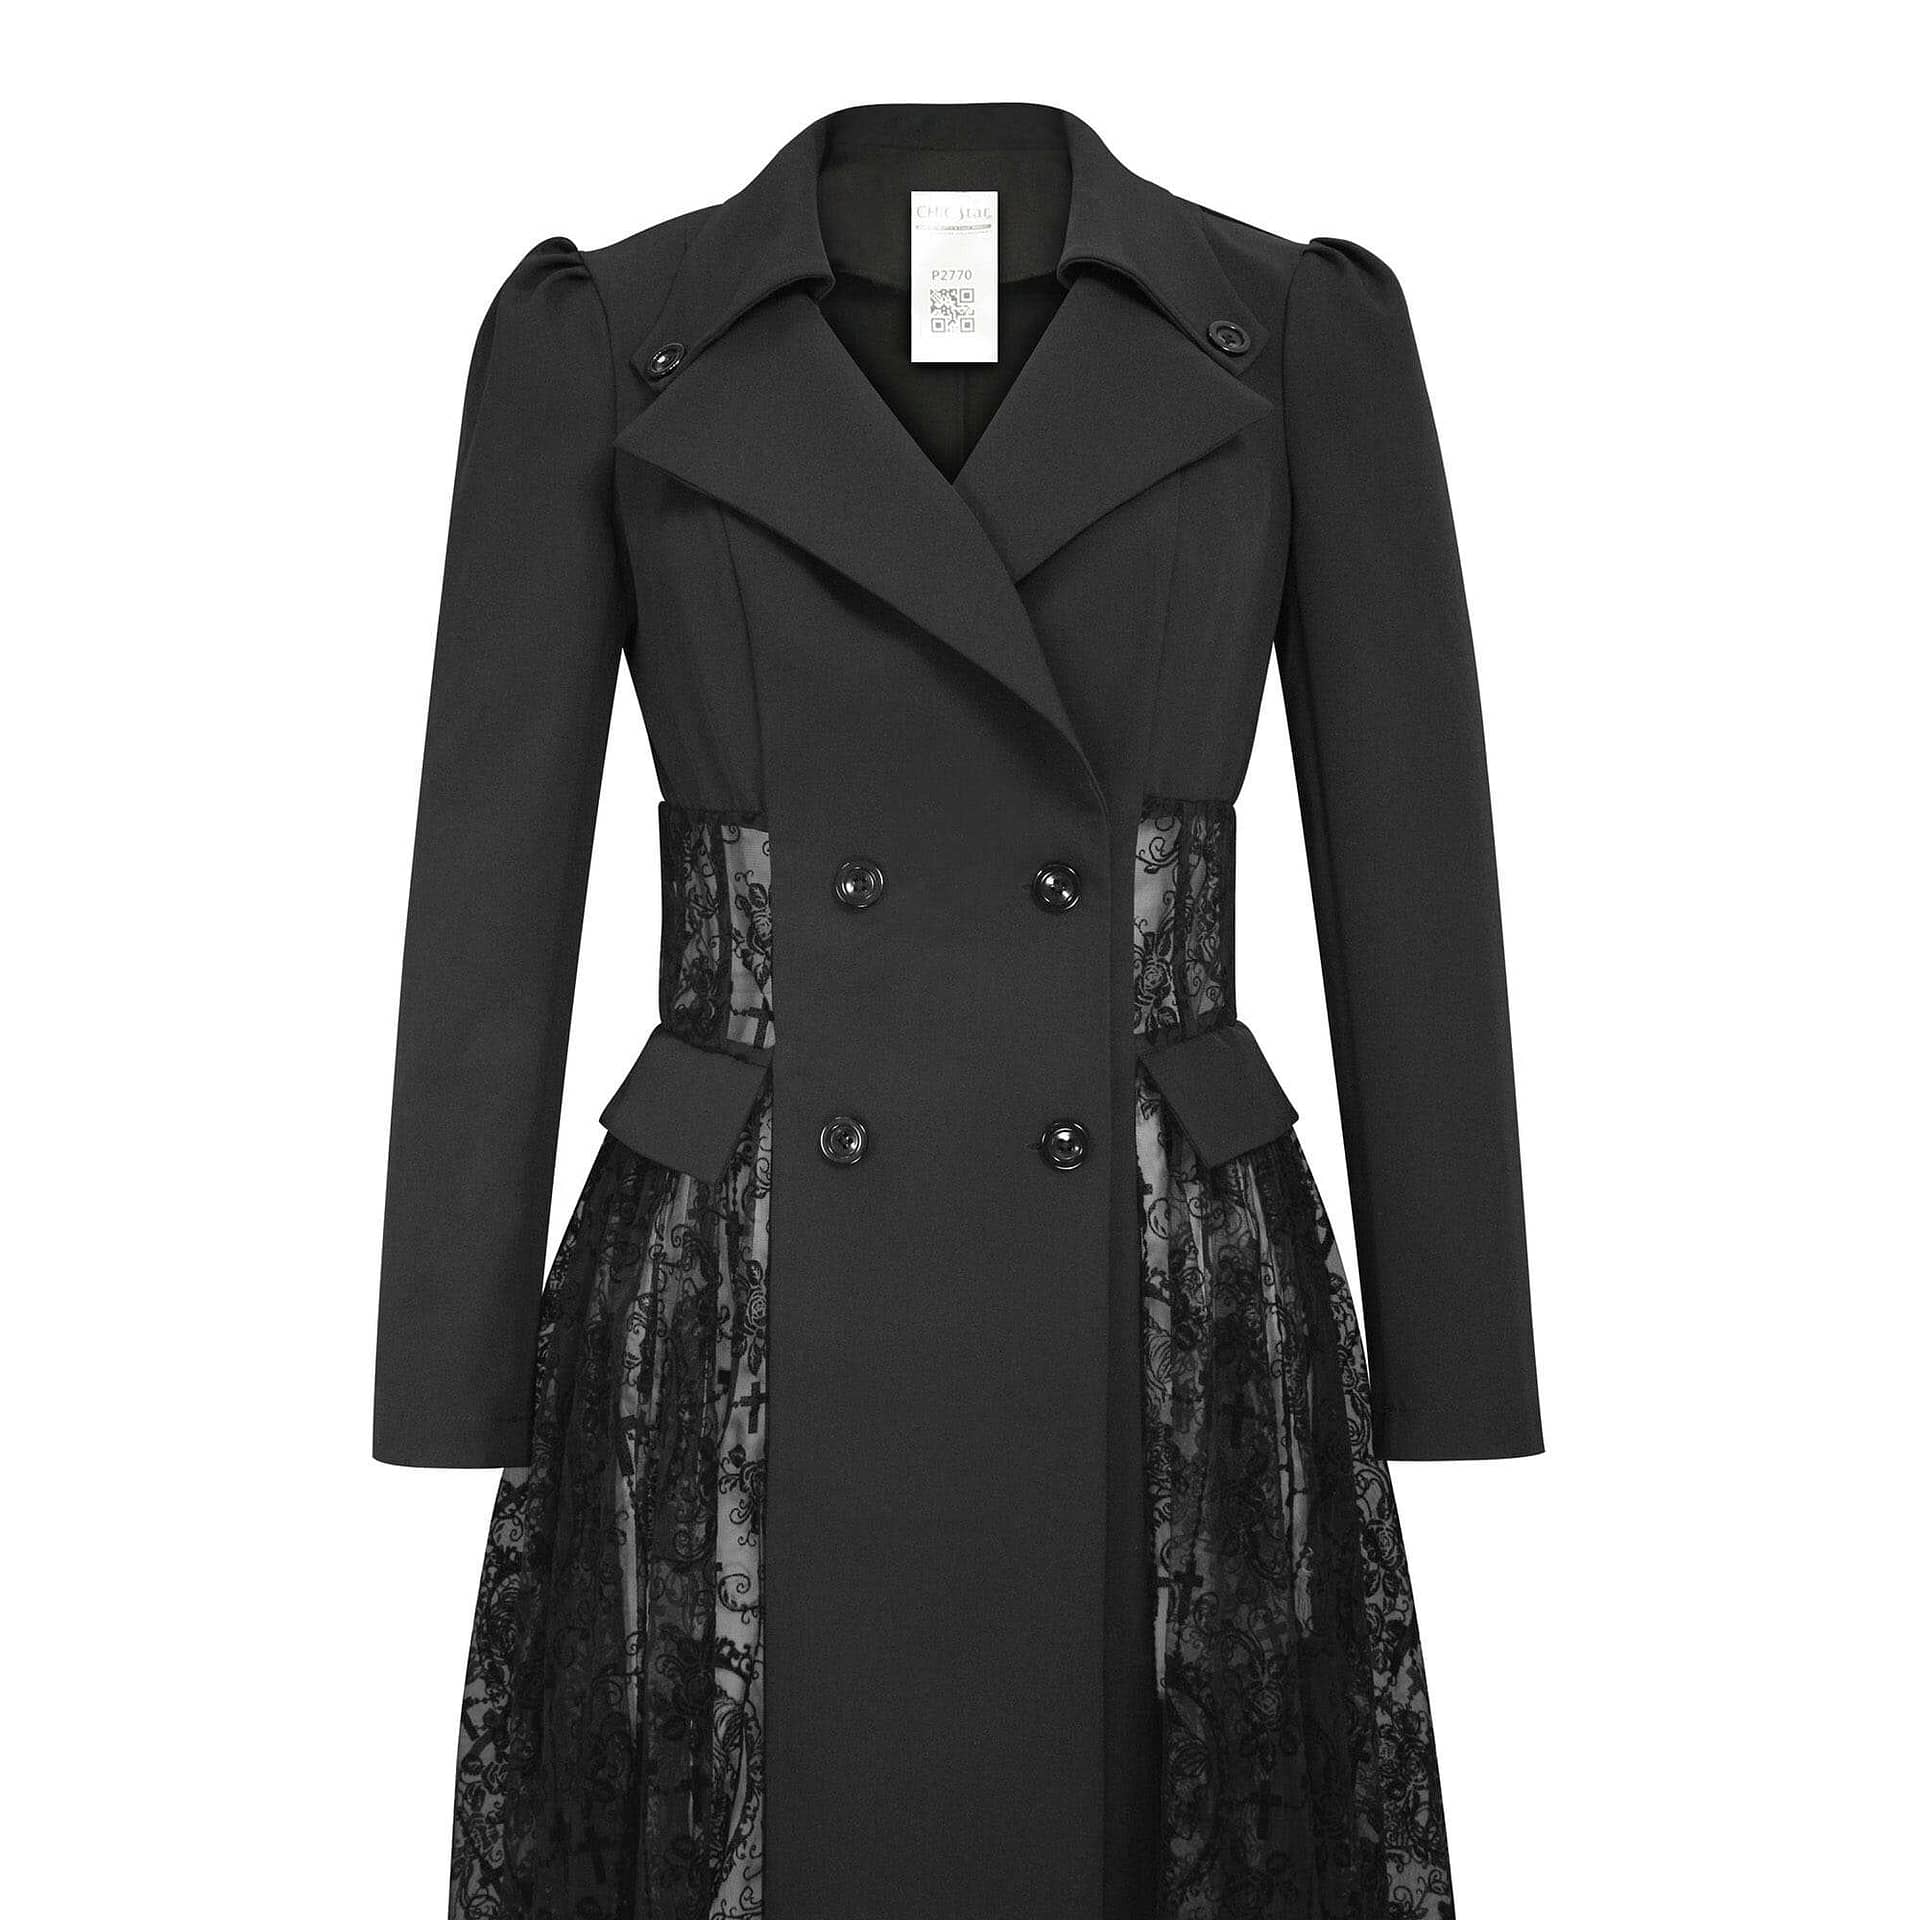 Lace Trench Jacket - Valkyrie Apparel